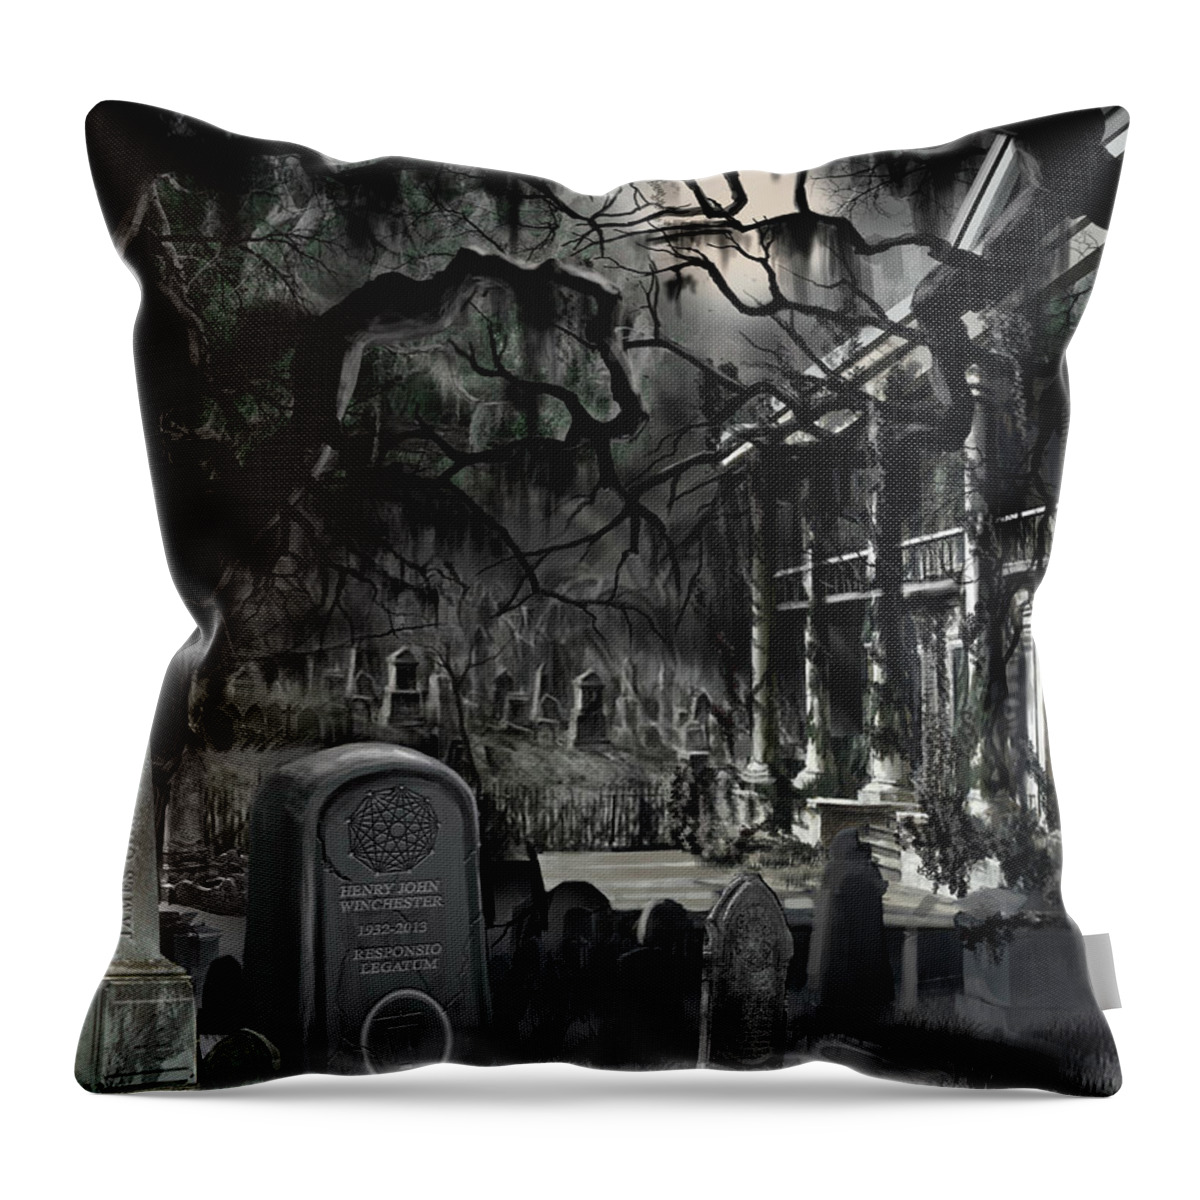 James C. Hill; James Christopher Hill; Gypsey Teague; Jameshillgallery.com; Bayou; Cajun; Voodoo; Hoodoo; Ghost; Witch; Witches; Curse; New Orleans; Swamp; Moss; Plantation; Moon; Dark; Darkness; Tomb; Tombstone; Southern Plantation; Mansion; Secret; Sorcery; Witchcraft; Candle; Fire Throw Pillow featuring the painting The Curse of Johnson Bayou by James Hill